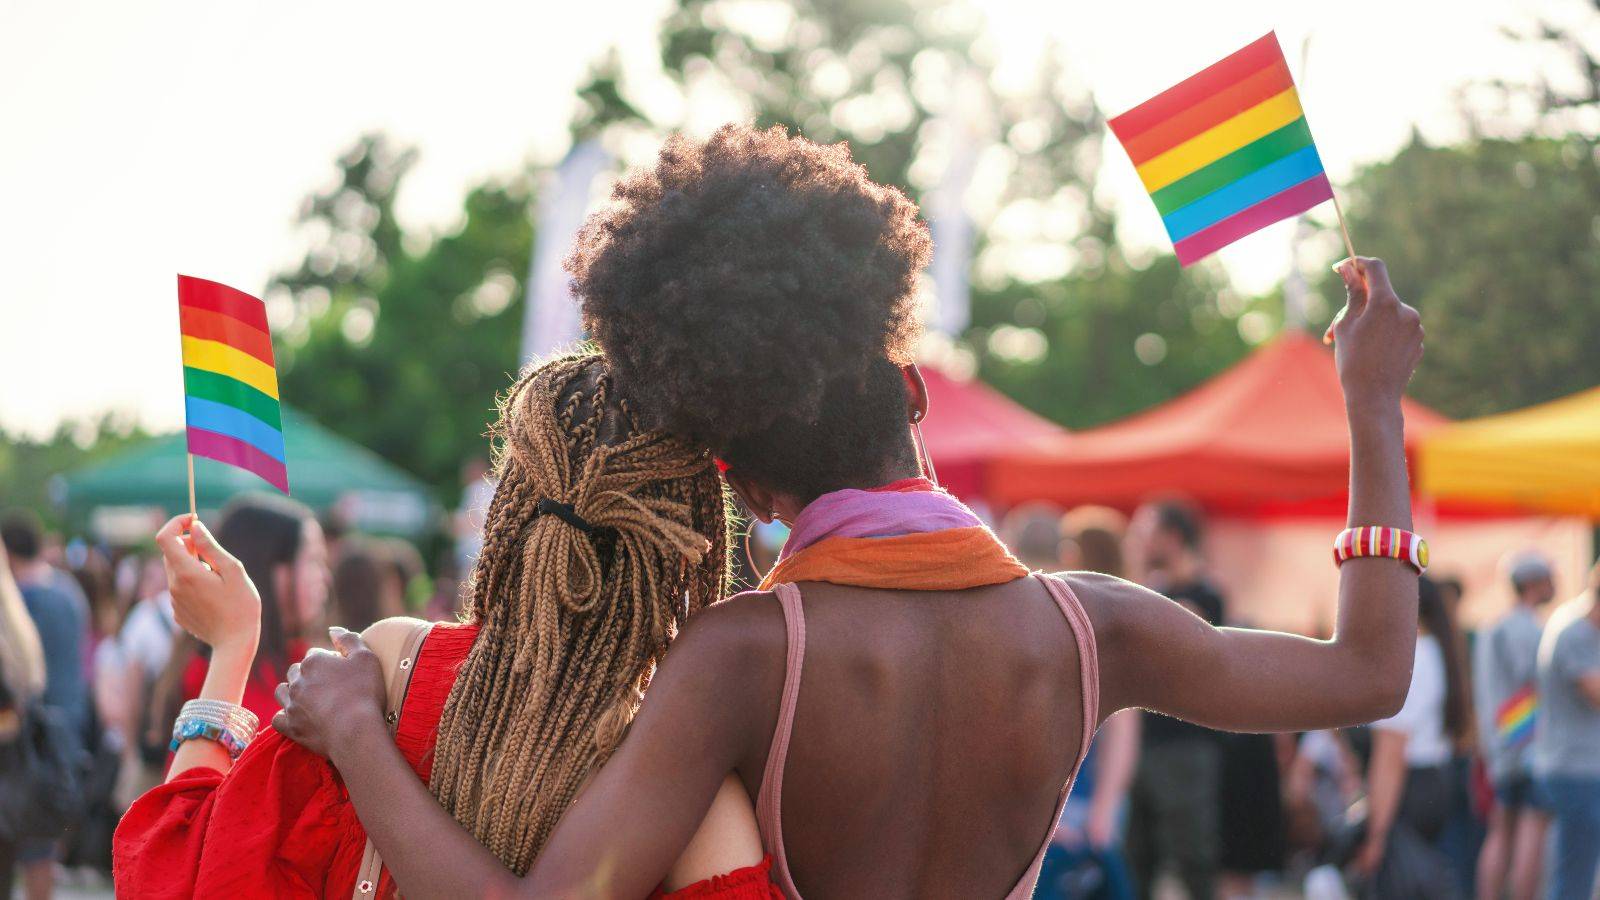 photo of two people holding pride flags celebrating pride month